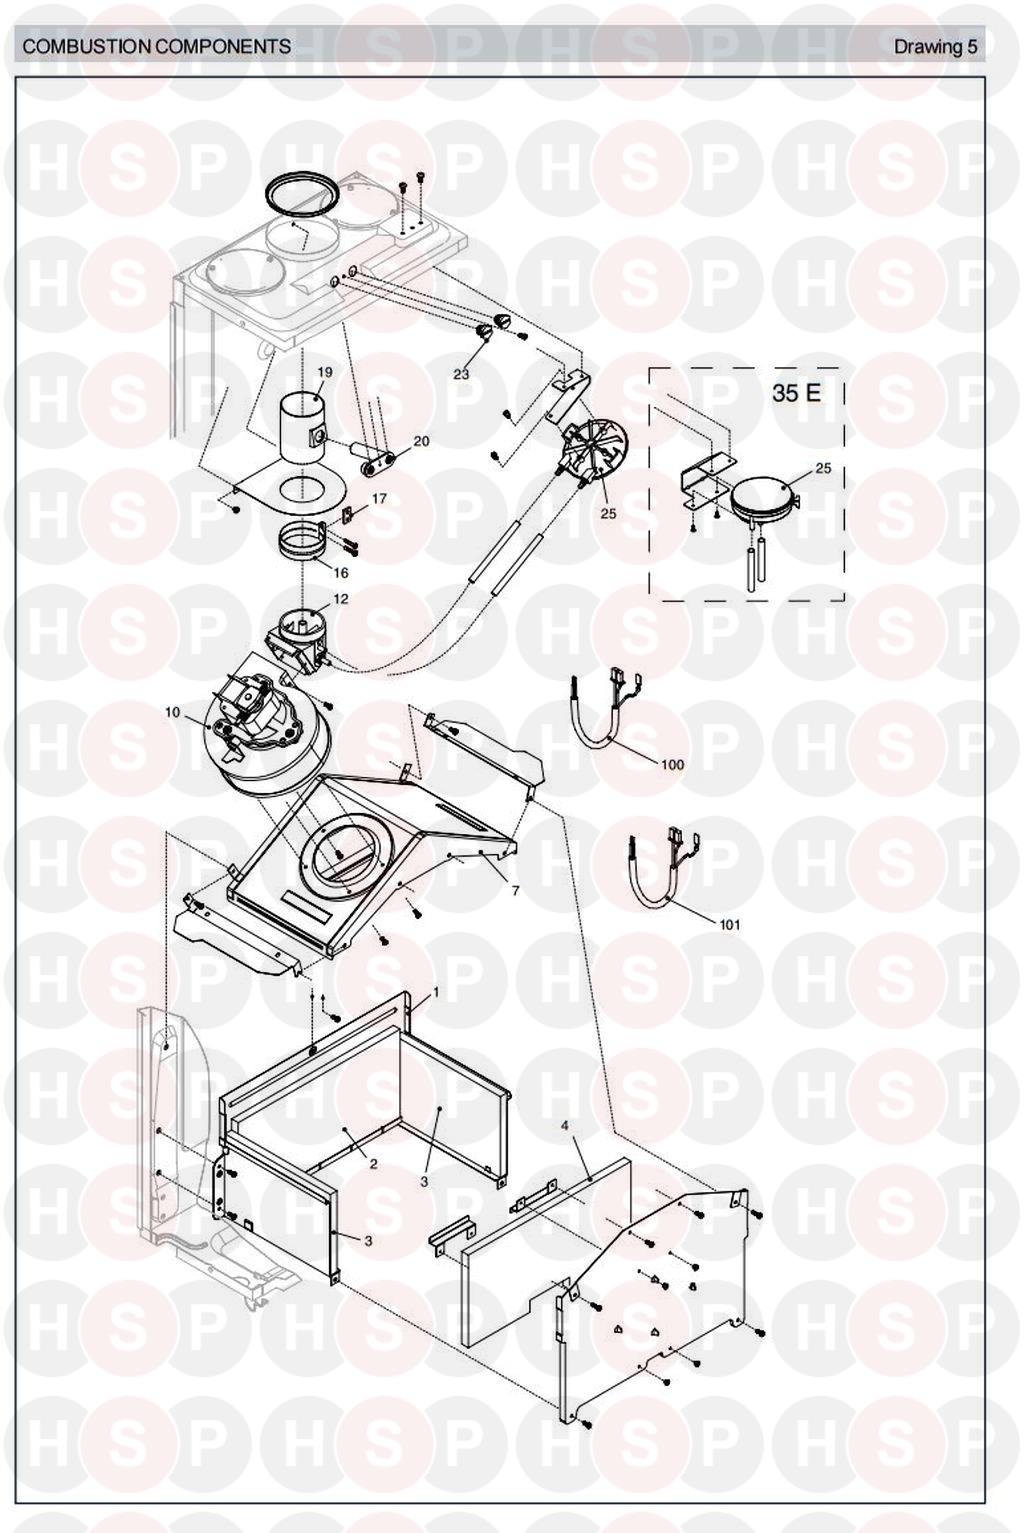 Combustion Chamber diagram for Vokera Mynute 35E